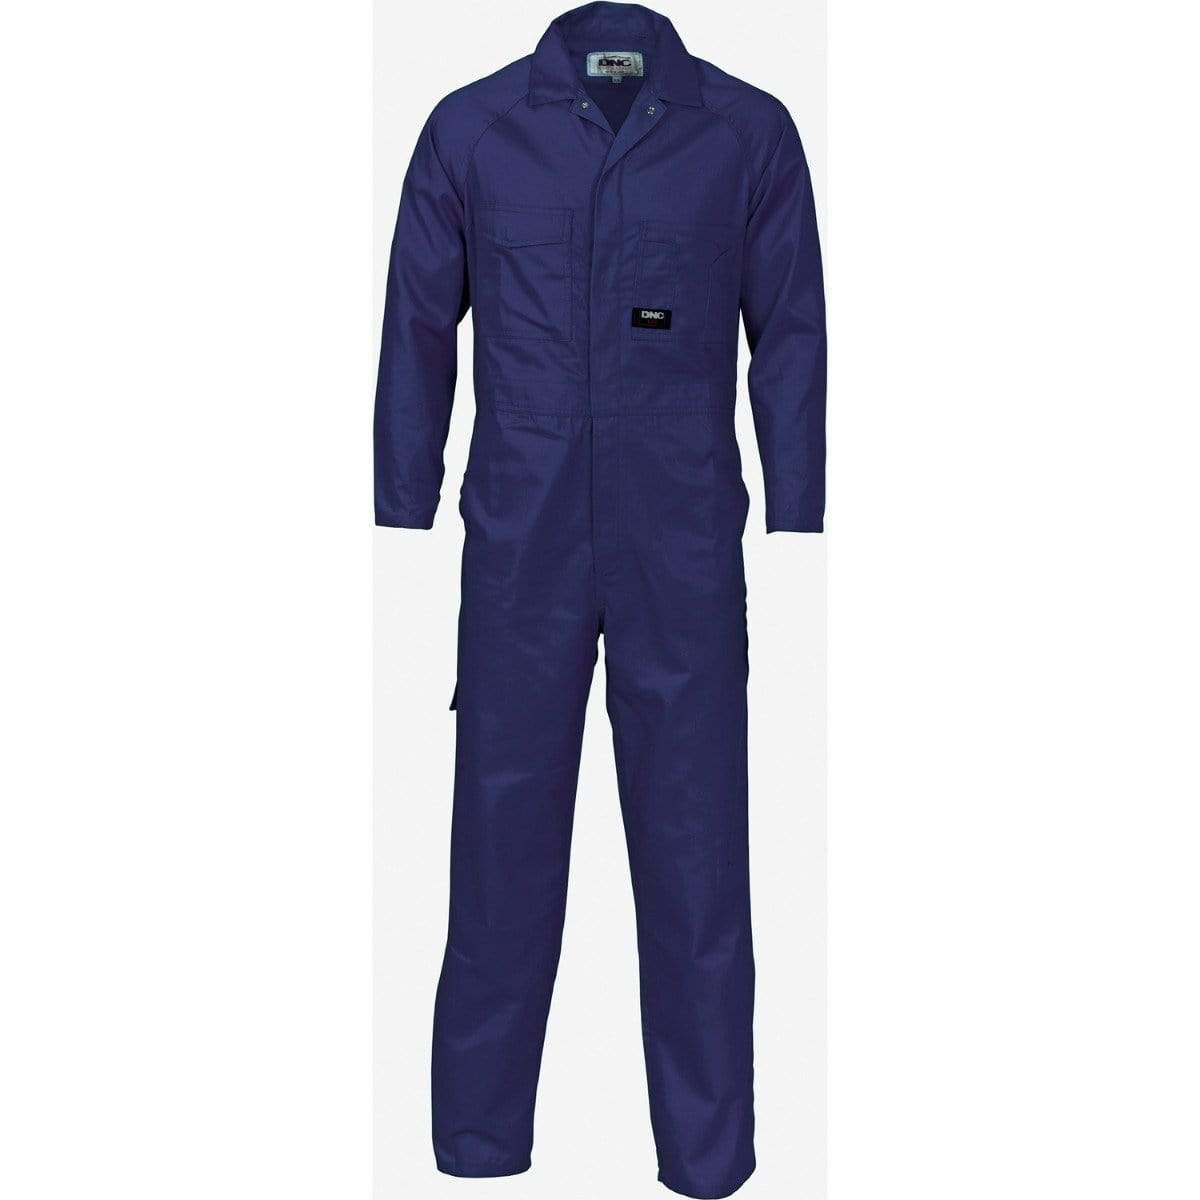 Dnc Workwear 200 Gsm Polyester Cotton Coverall - 3102 Work Wear DNC Workwear Navy 77R 